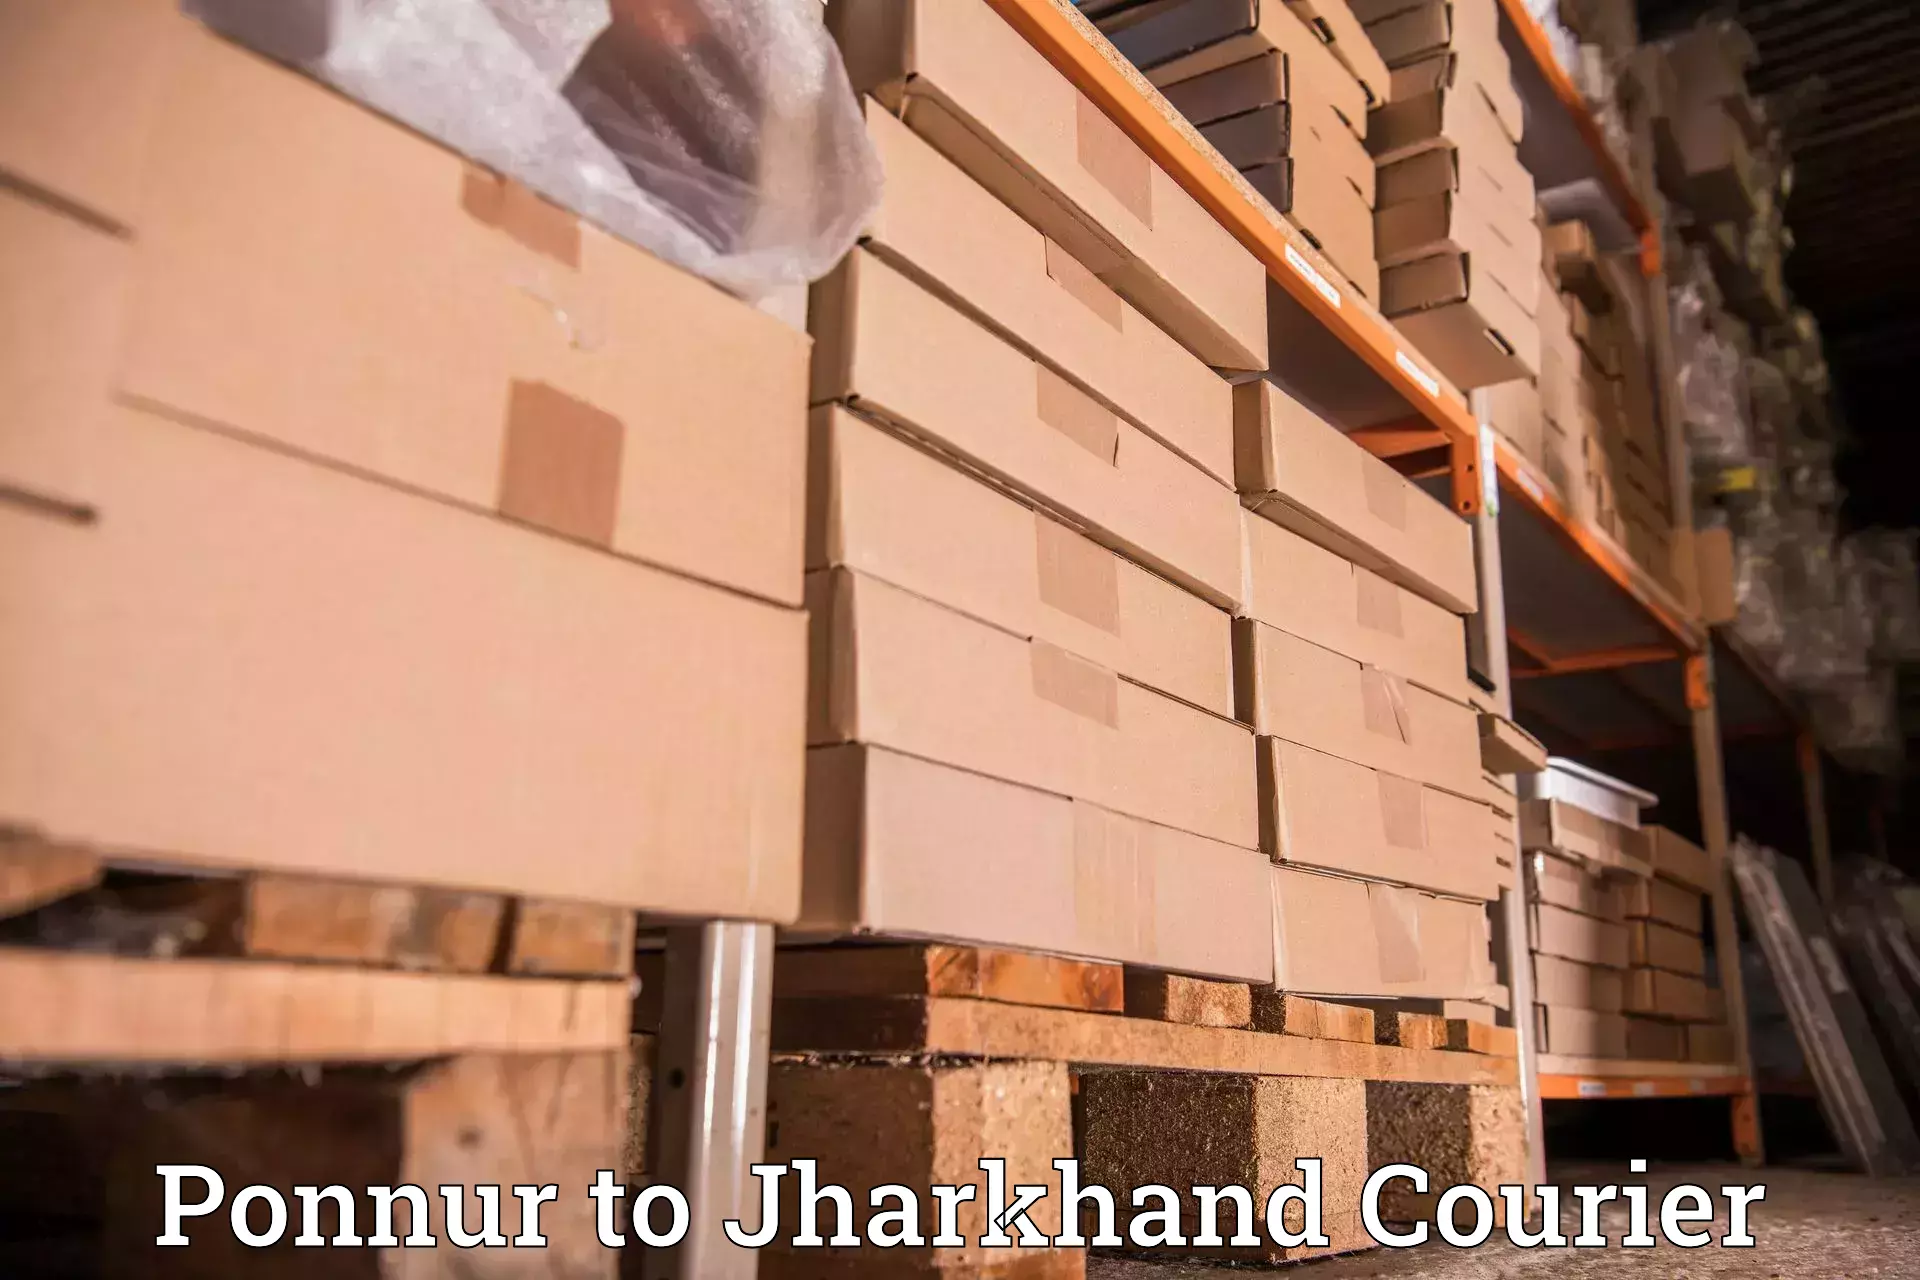 Delivery service partnership Ponnur to Jharkhand